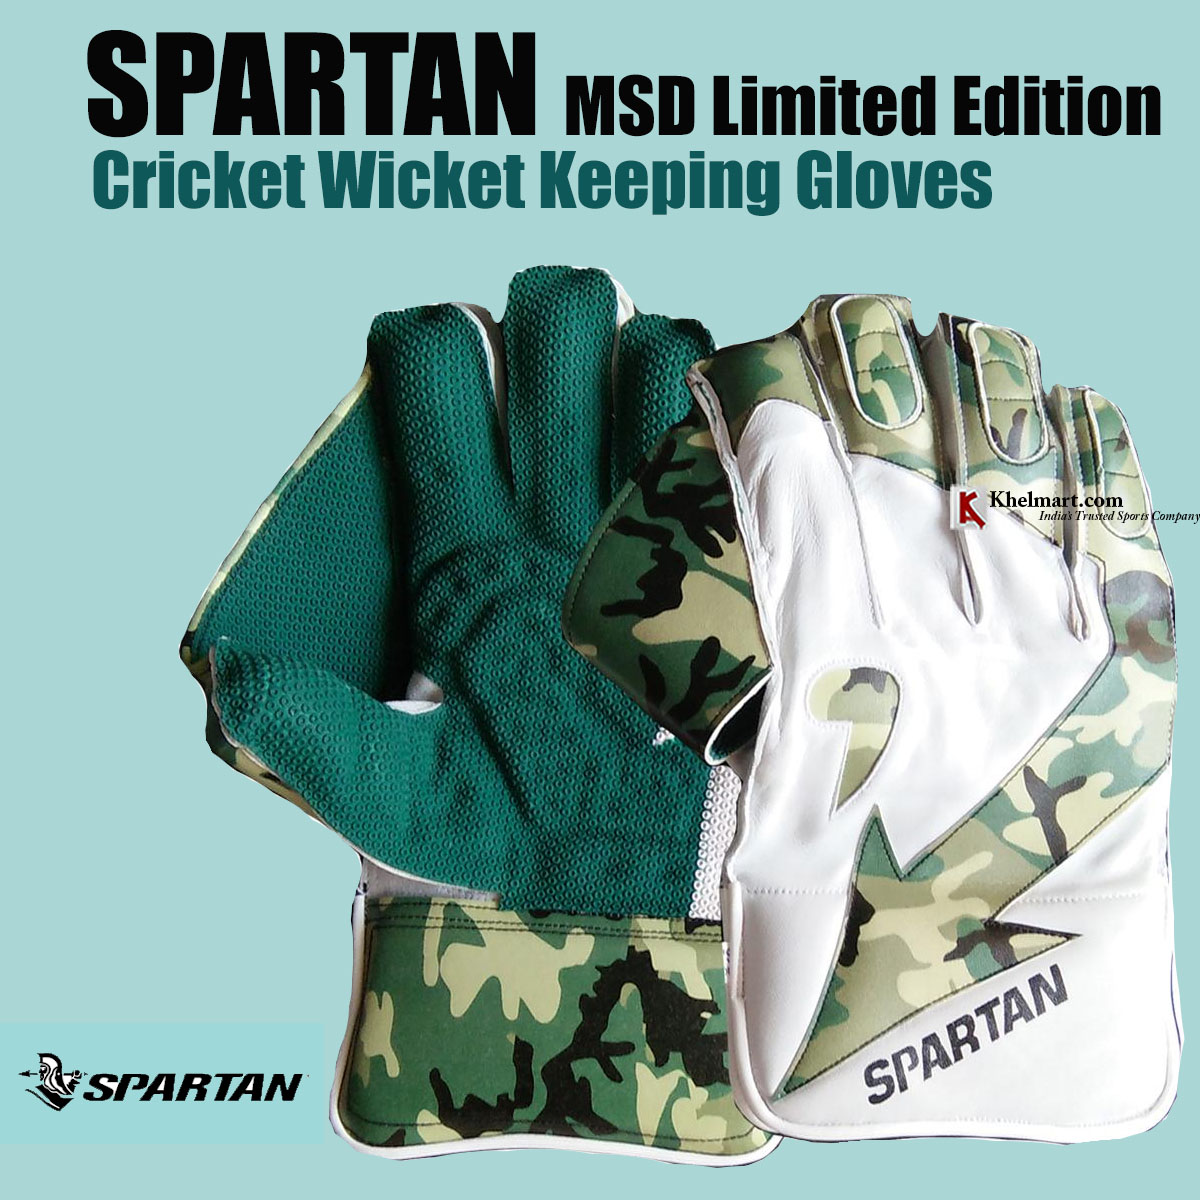 Spartan_MSD_Limited_Edition_Wicket_Keeping_Gloves_10.jpg